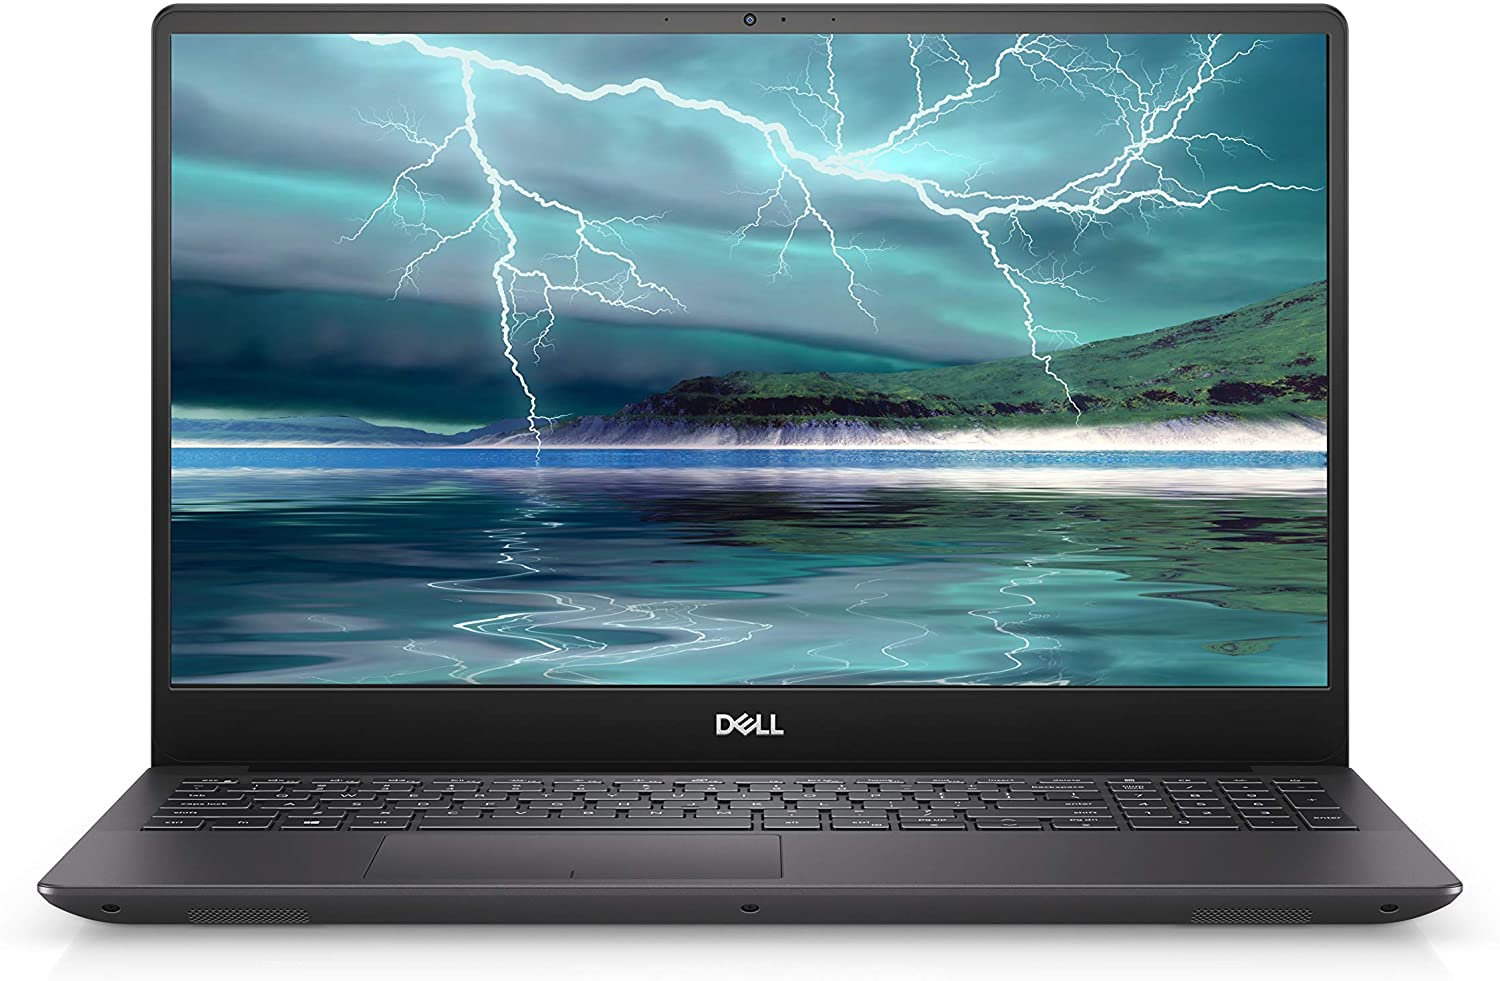 <strong>Dell Inspiron 15 7000 15.6 Inch FHD Display Laptop</strong>